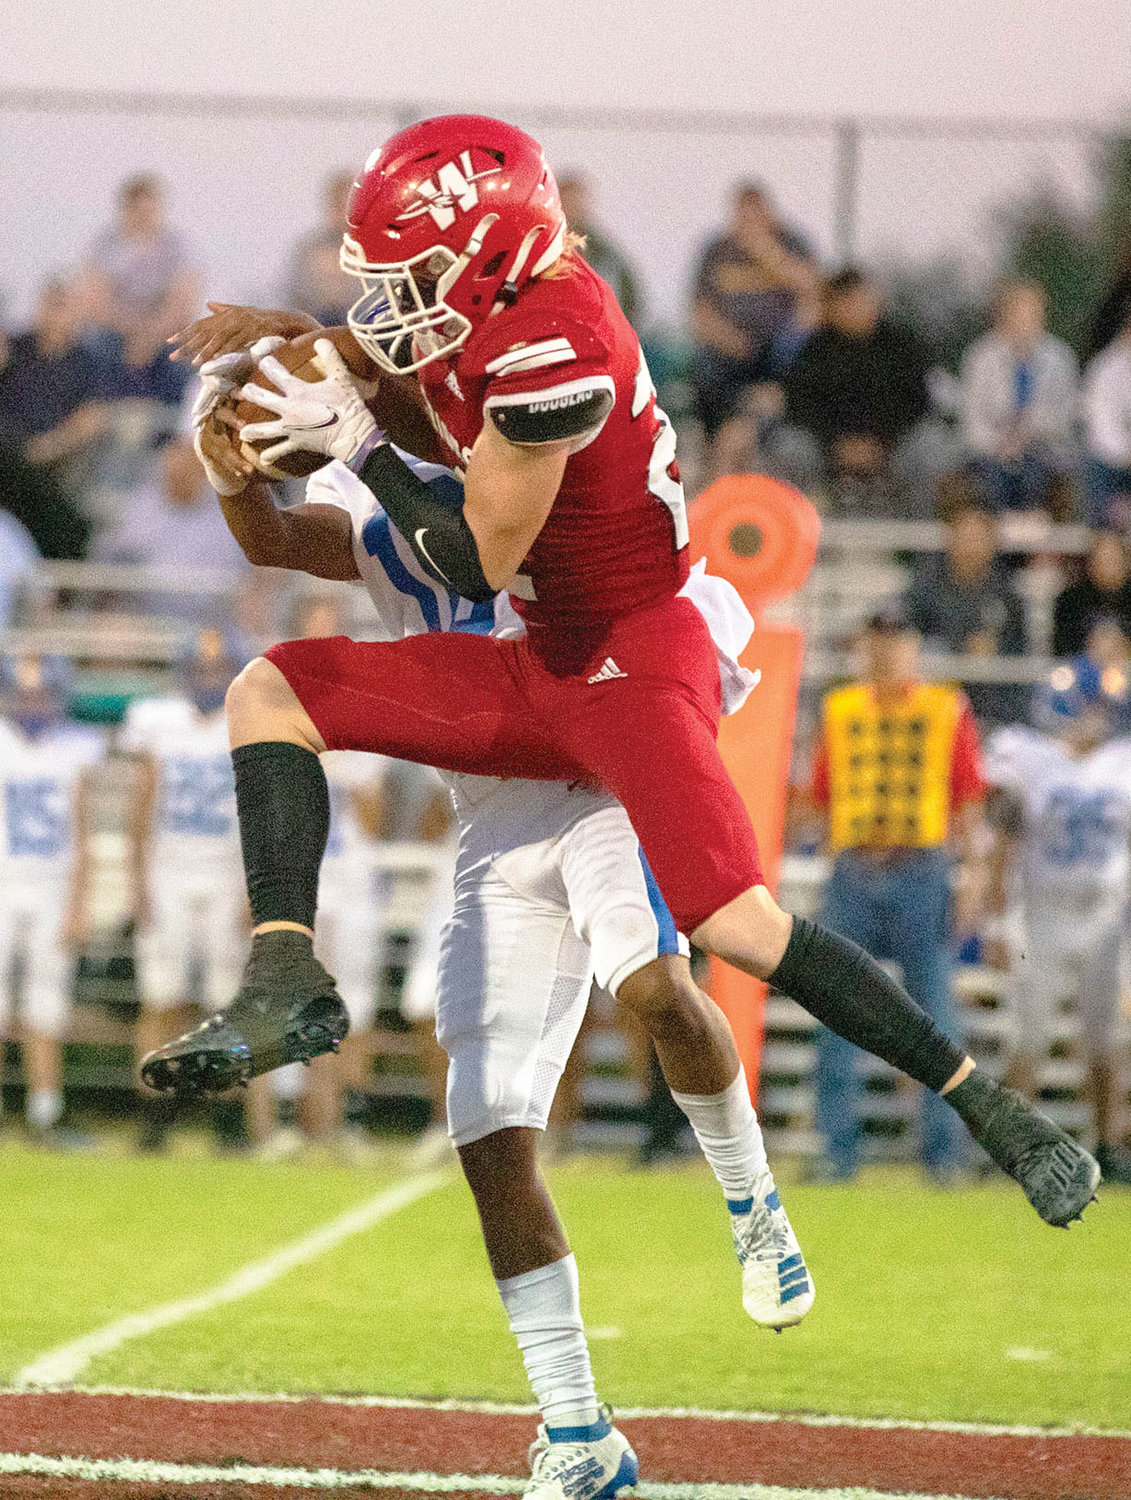 Washington senior Reese Stephens picks off a Holdenville pass during the Warriors’ 69-0 win over the Wolverines. The interception was one of eight on the night.